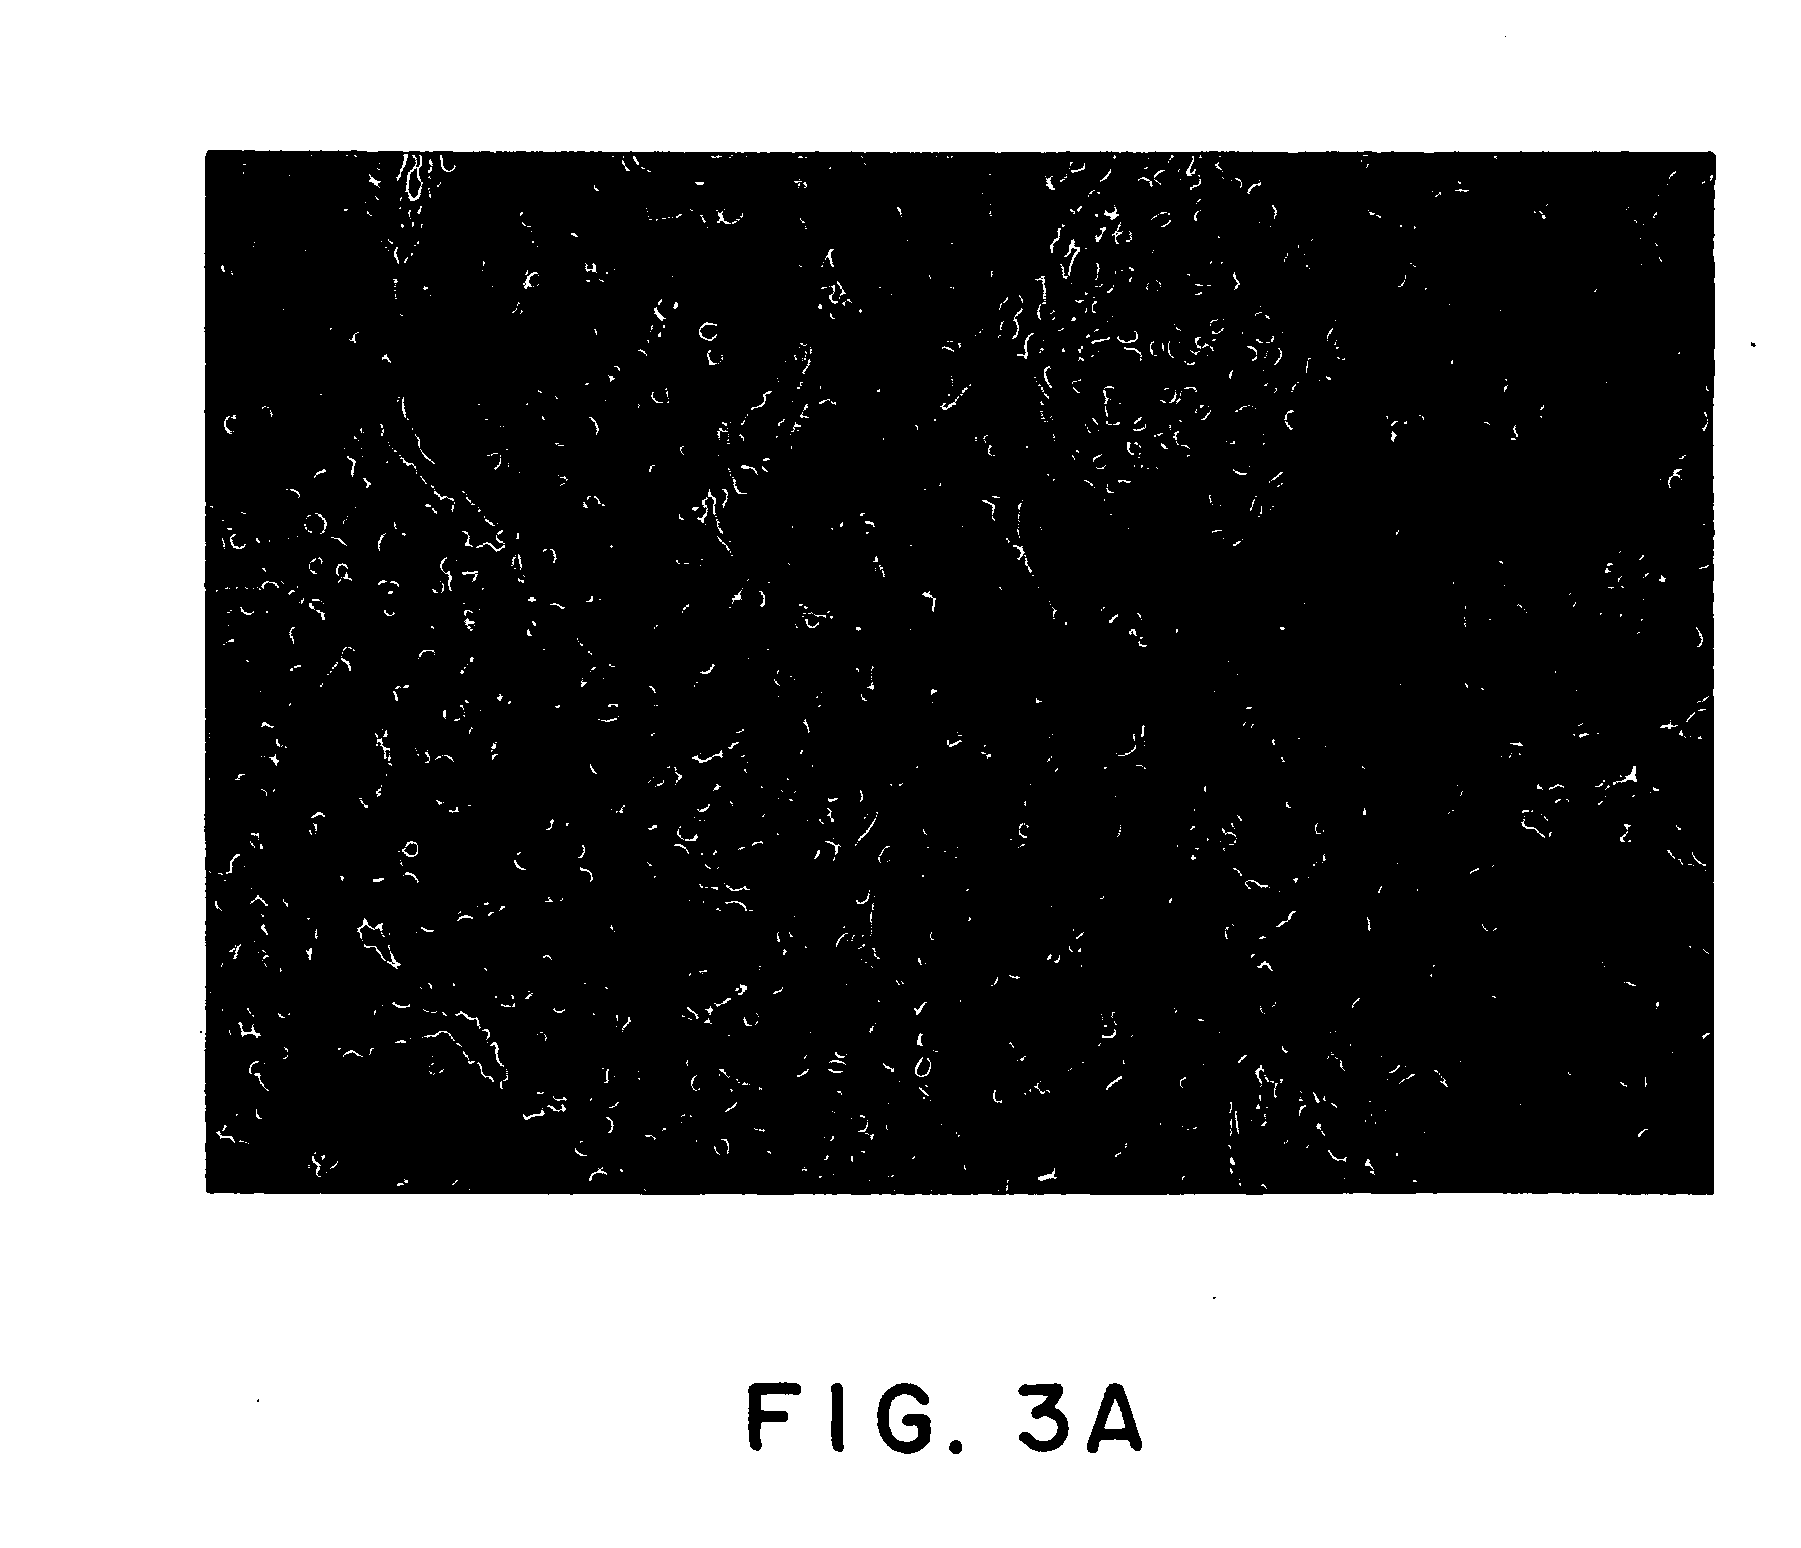 Composition for storing organ and method of storing organ